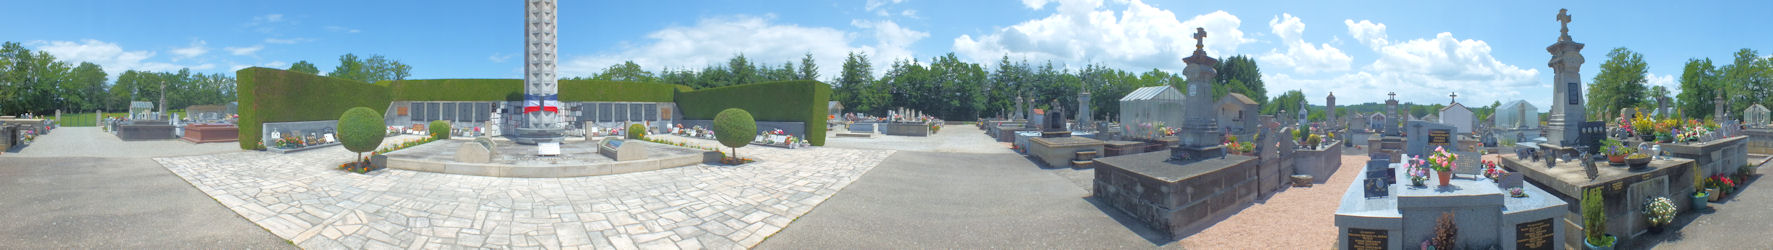 Panorama of the cemetery at Oradour-sur-Glane (360 degree view)